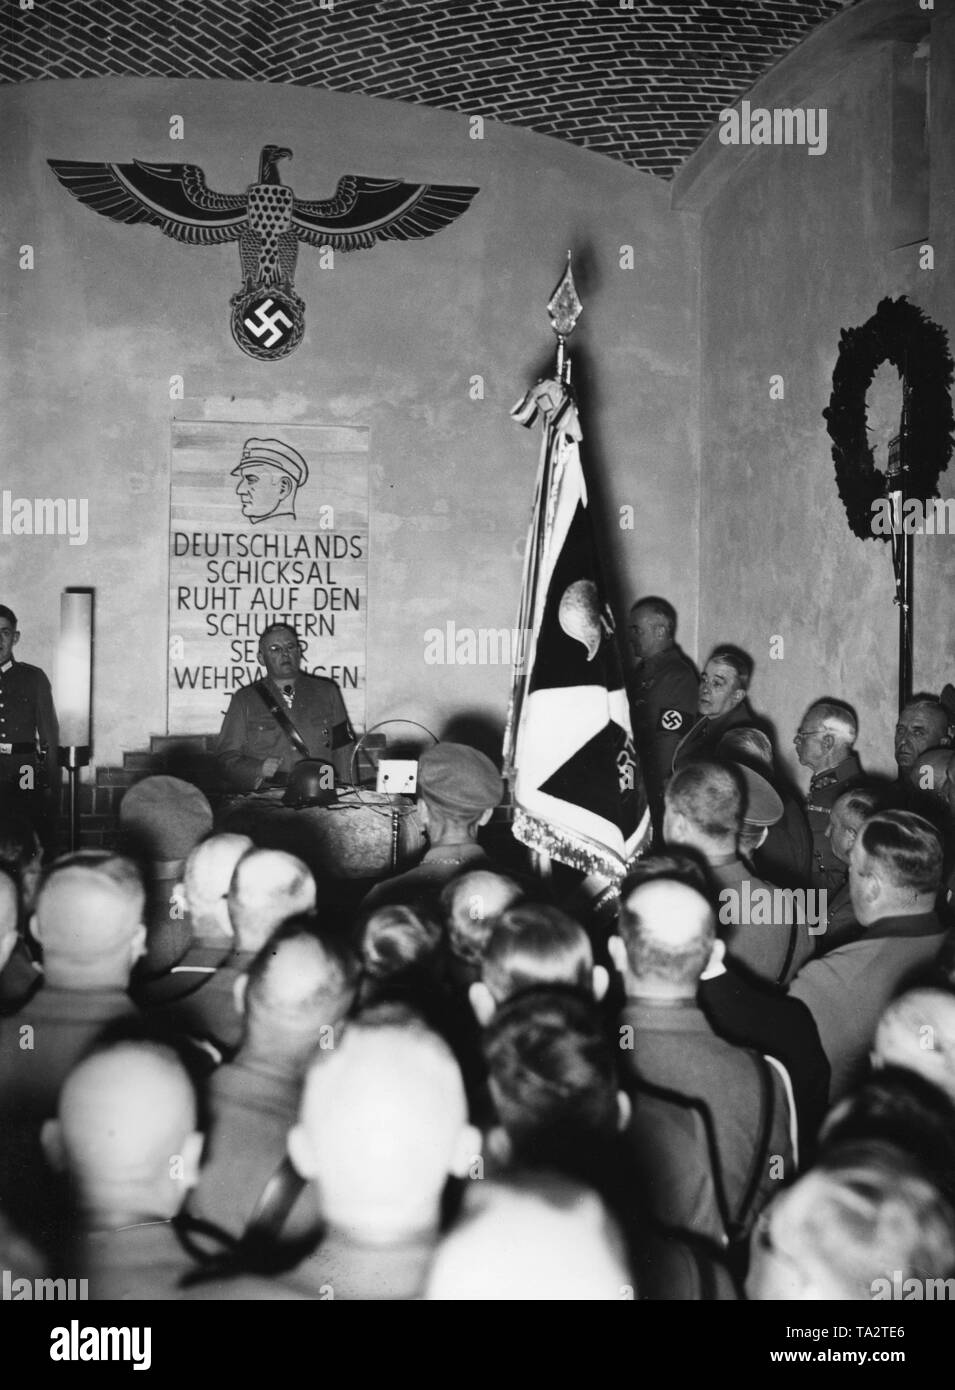 The leader of the National Socialist Alliance of Red Front-Fighters (Stahlhelm), Franz Seldte, holds an inauguration speech in Frankfurt (Oder) in front of members of the Landesgruppe Ostmark on the newly built  'Morozowicz-Gedenkhalle' ('Morozowicz Memorial Hall') in memory of the deceased leader of the Stahlhelm in Brandenburg, Elhard von Morozowicz . Under the drawing is the slogan: 'Germany's fate rests on the shoulders of its defensive youth!' Stock Photo